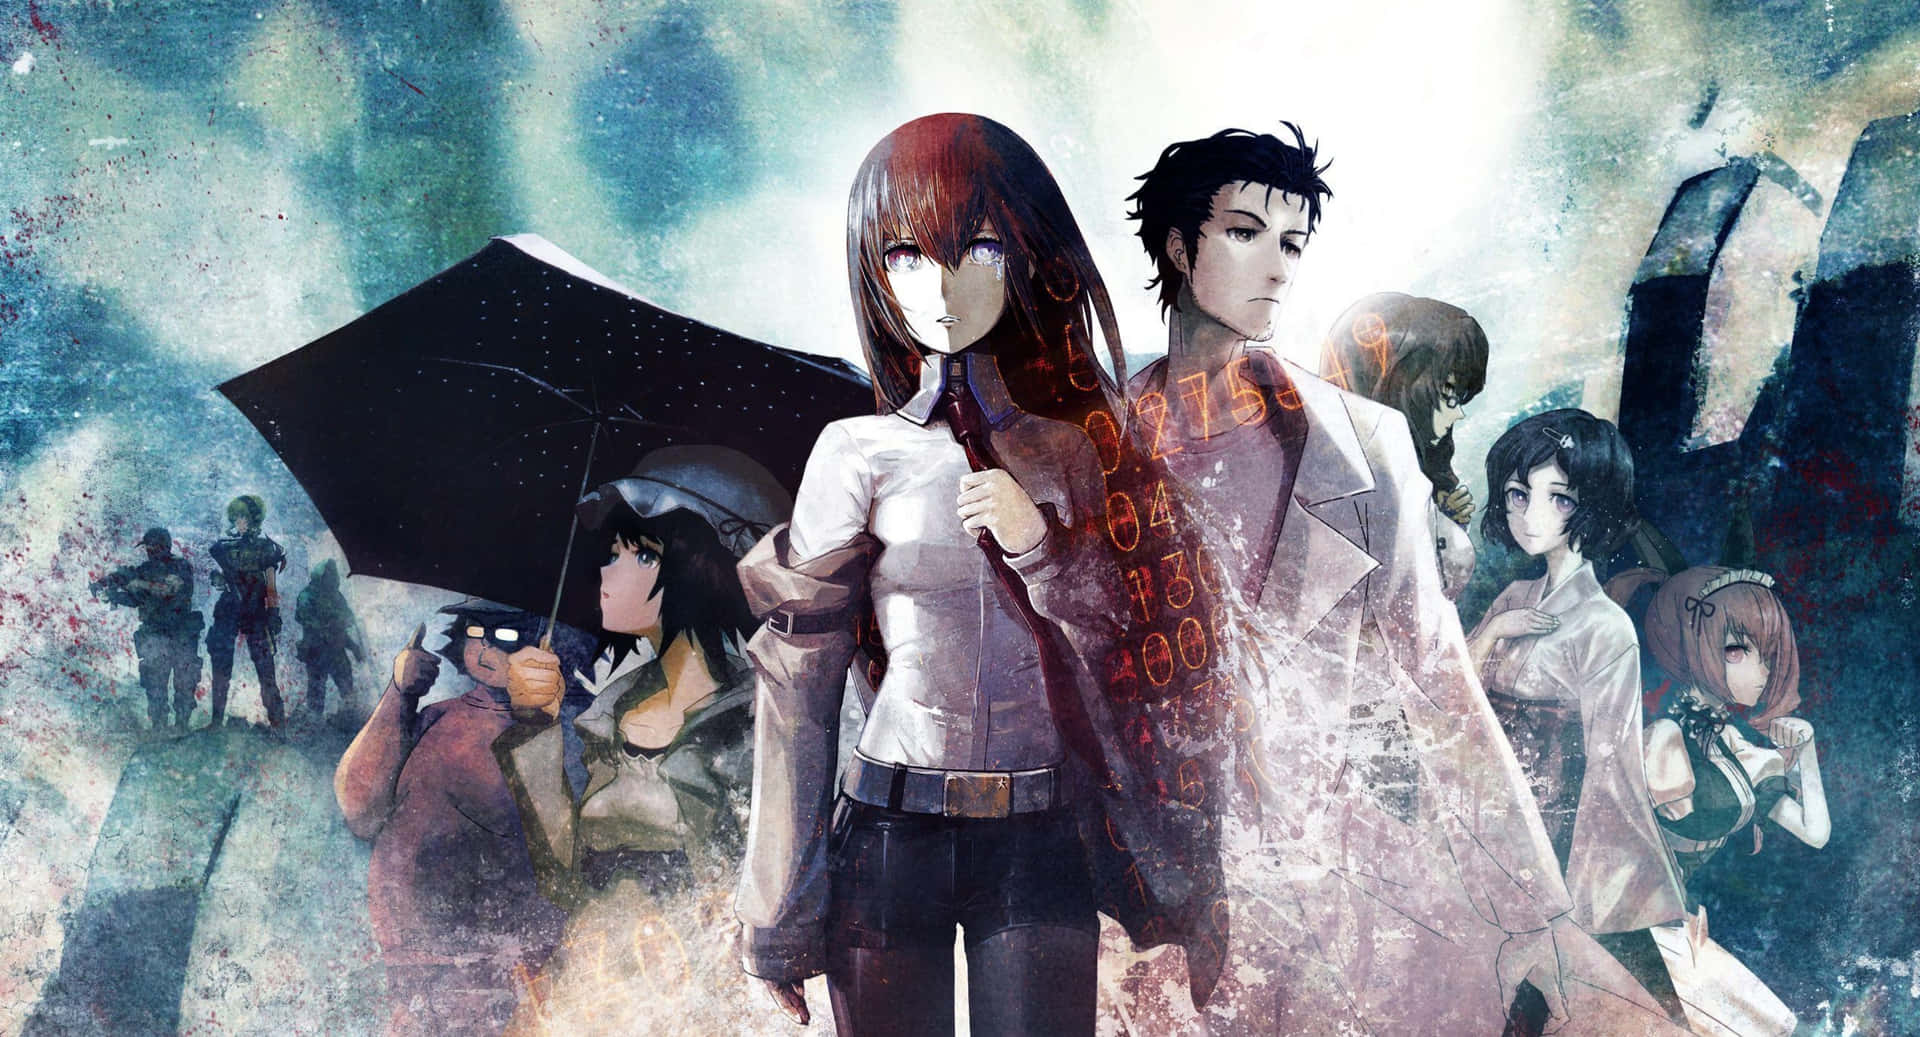 Bring your future into the present with Steins Gate